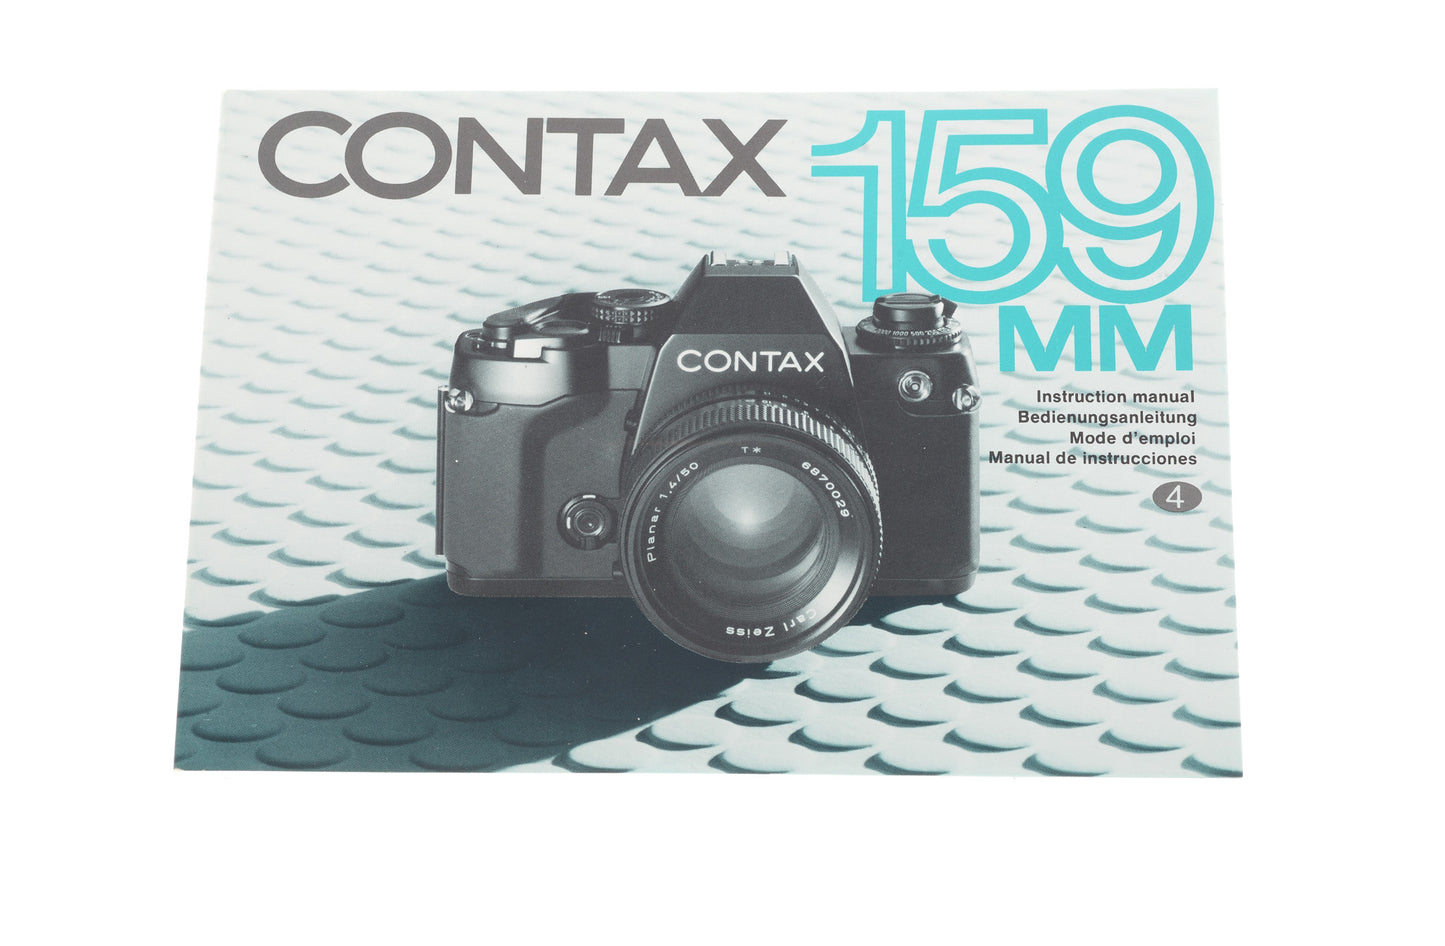 Contax 159 MM Instructions